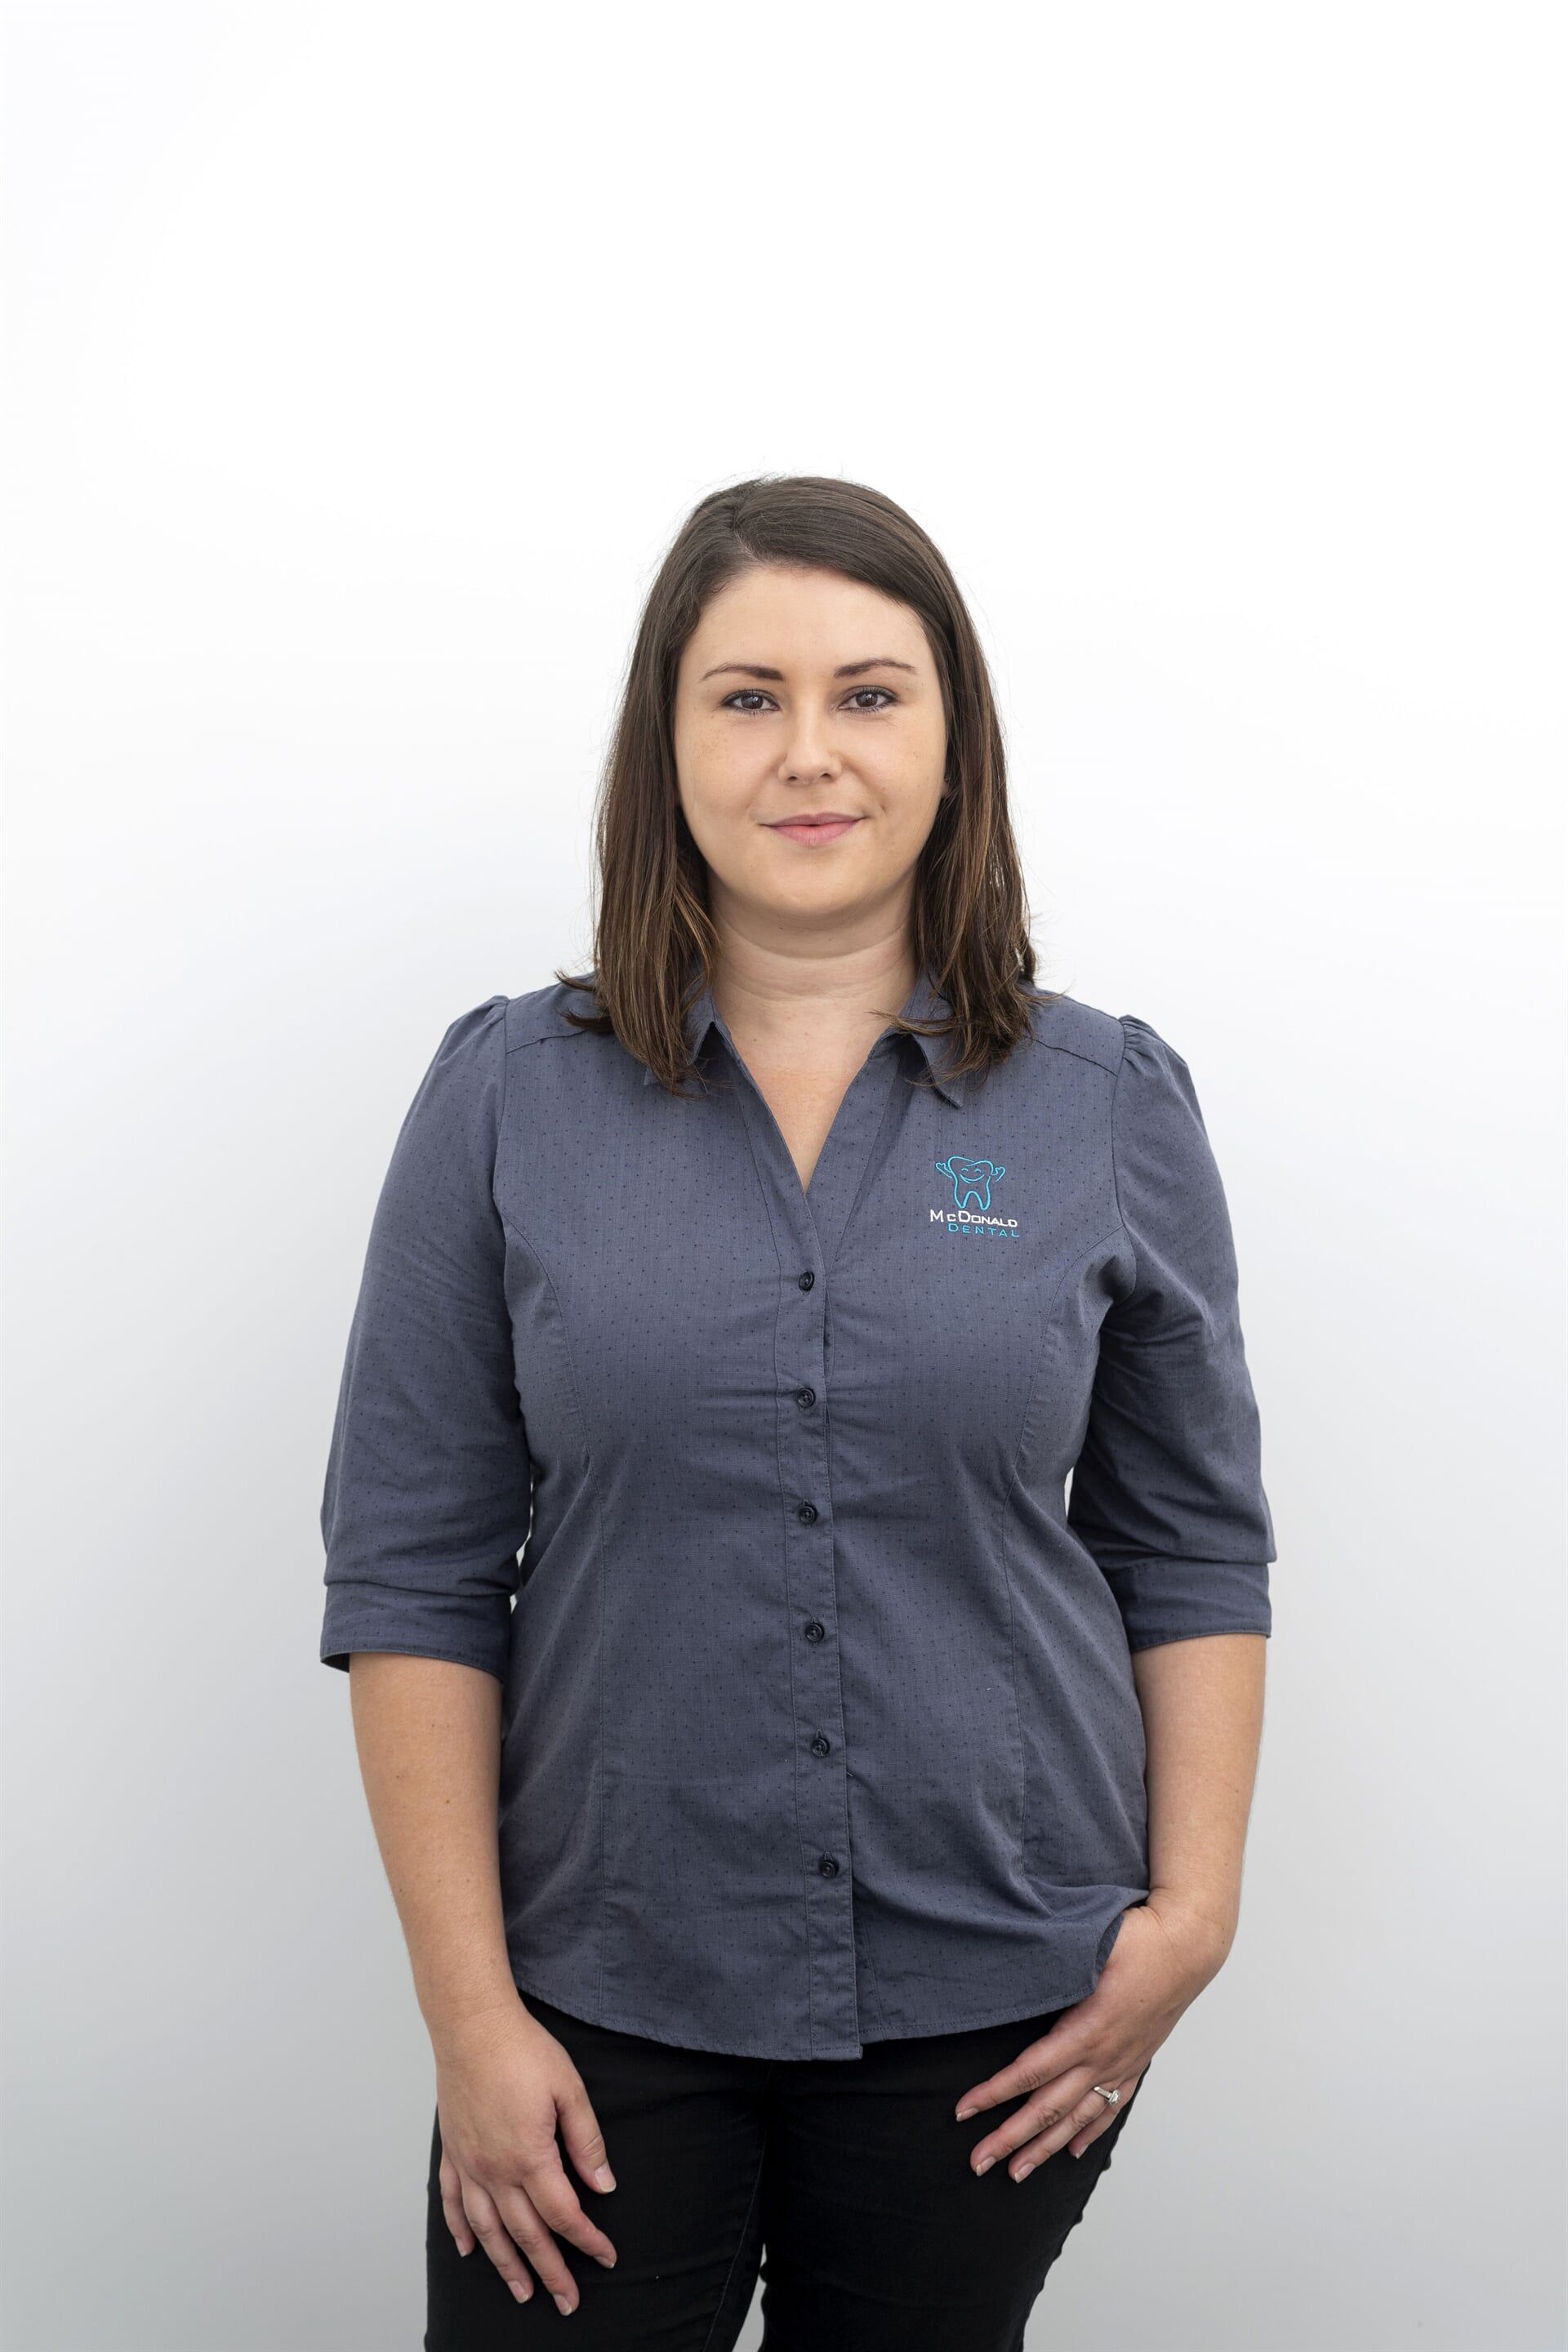 Toni Ford — Dental Services in Gympie, QLD